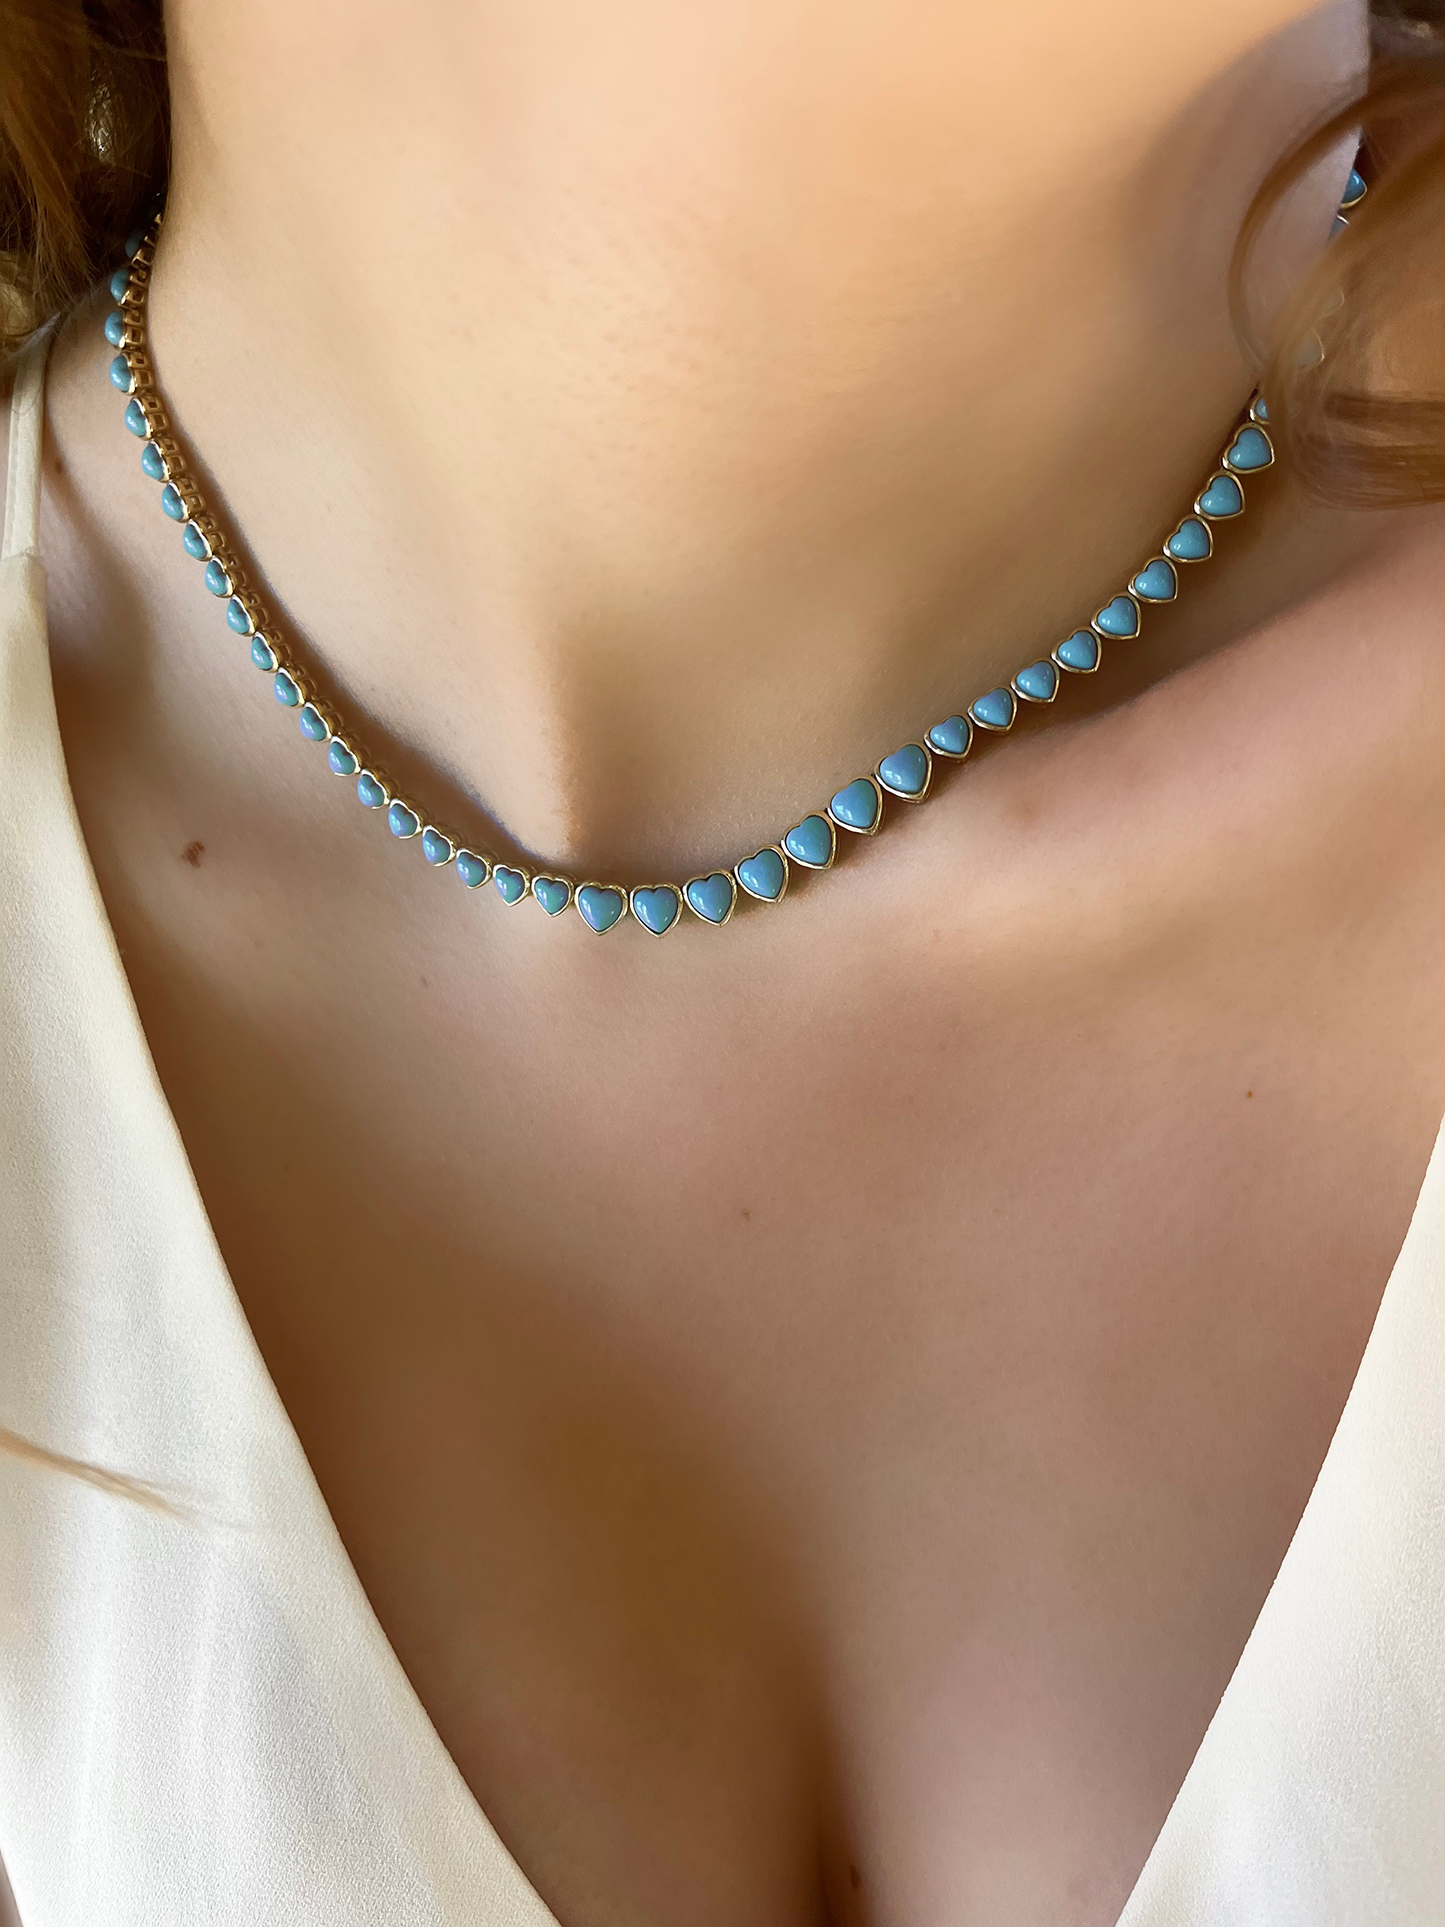 Turquoise Heart-Shaped Necklace